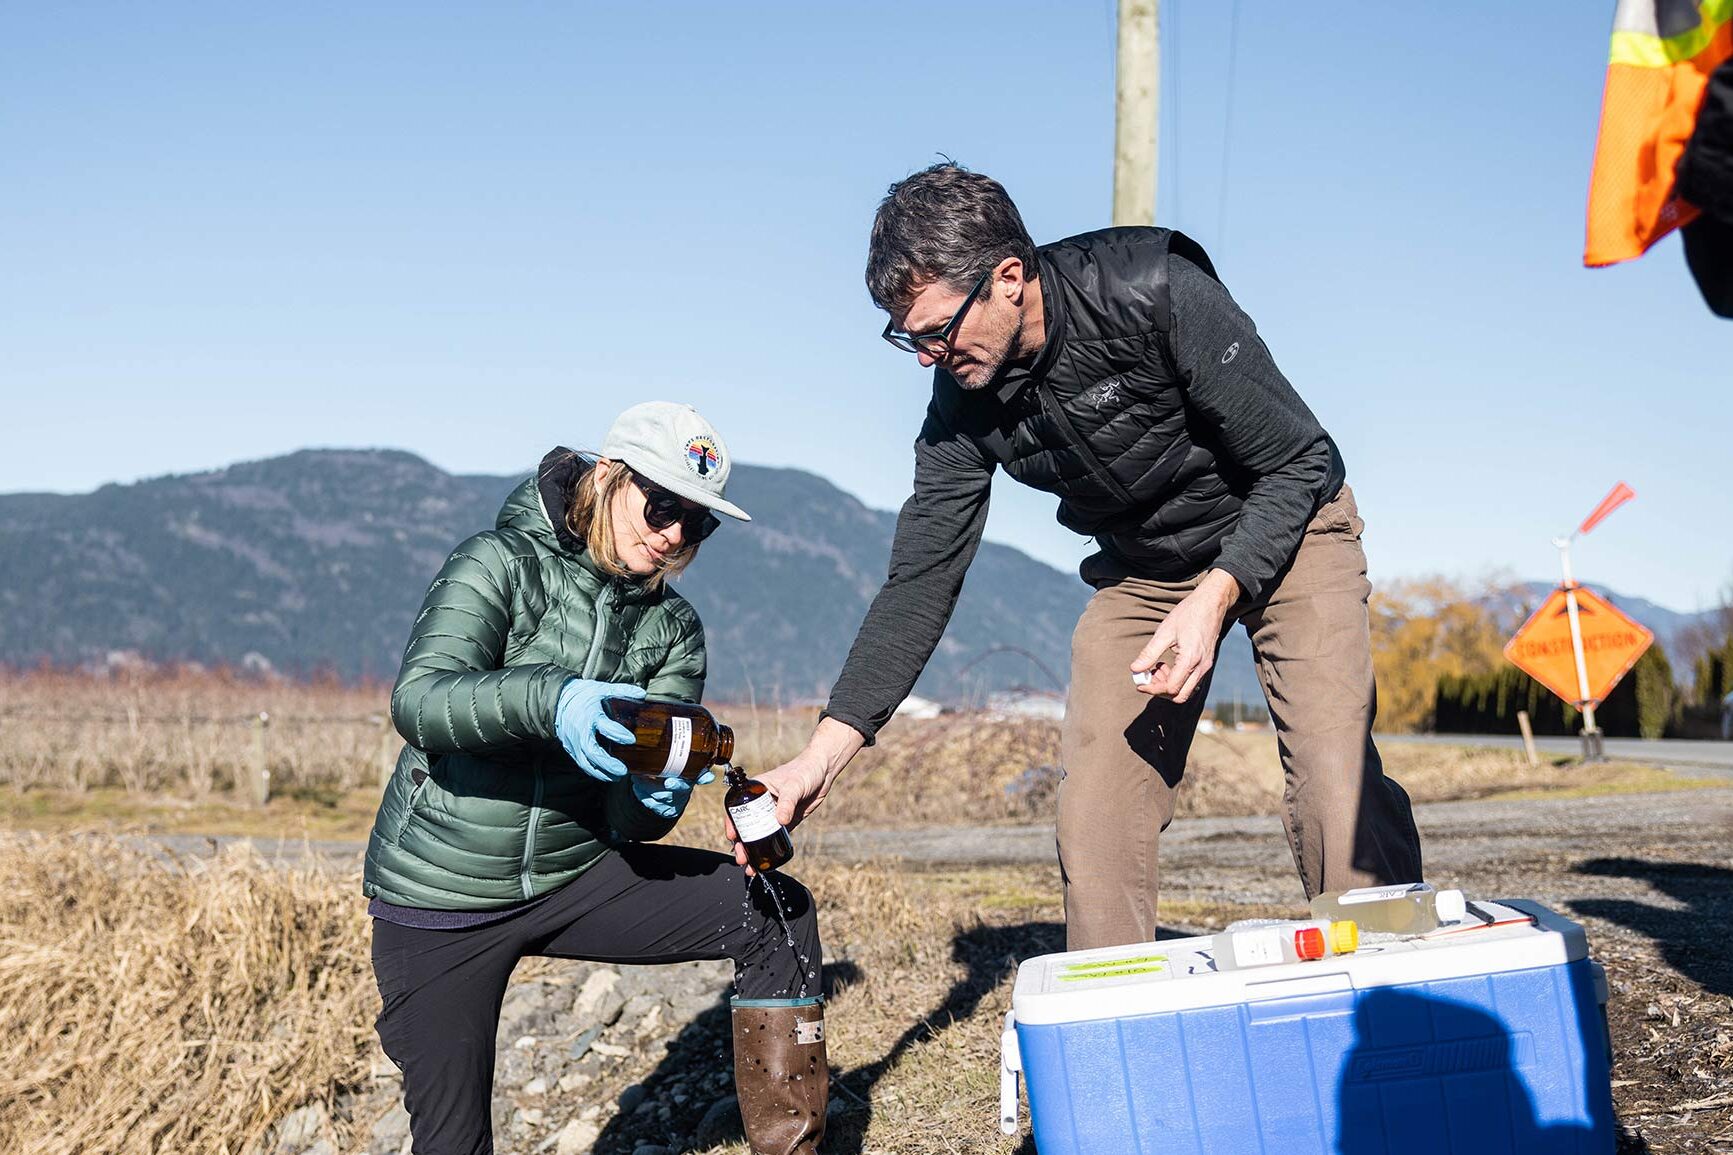 Two people working together to collect water samples in a farm field with the mountains in the background.